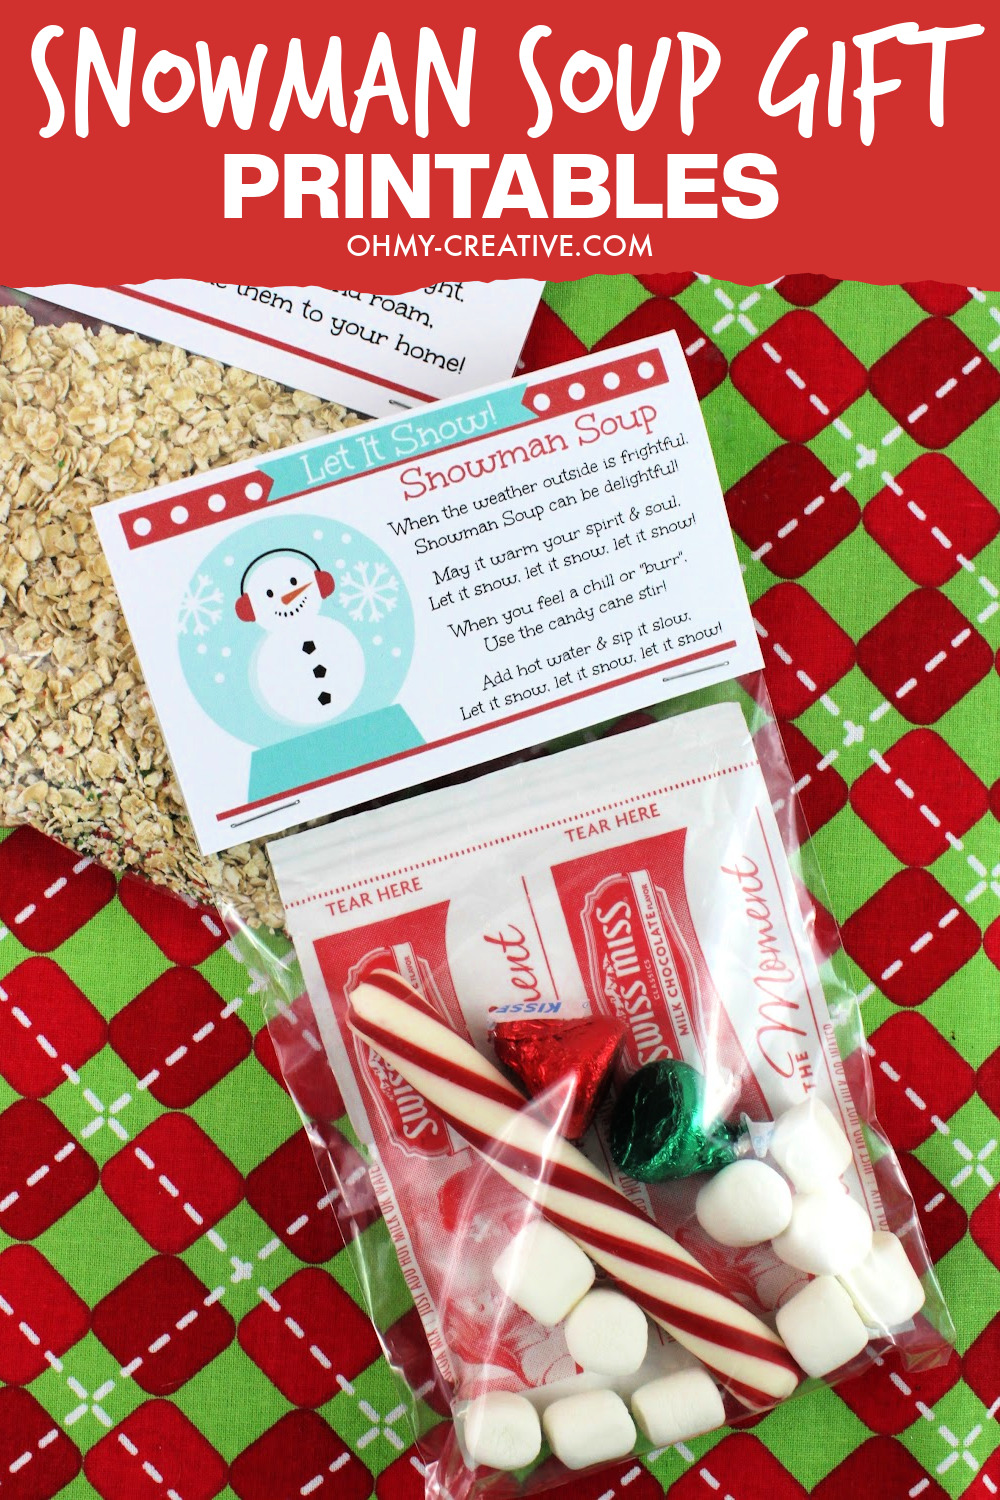 Snowman soup gift recipe with free printable on a red and green checked background. A great DIY Christmas gift!